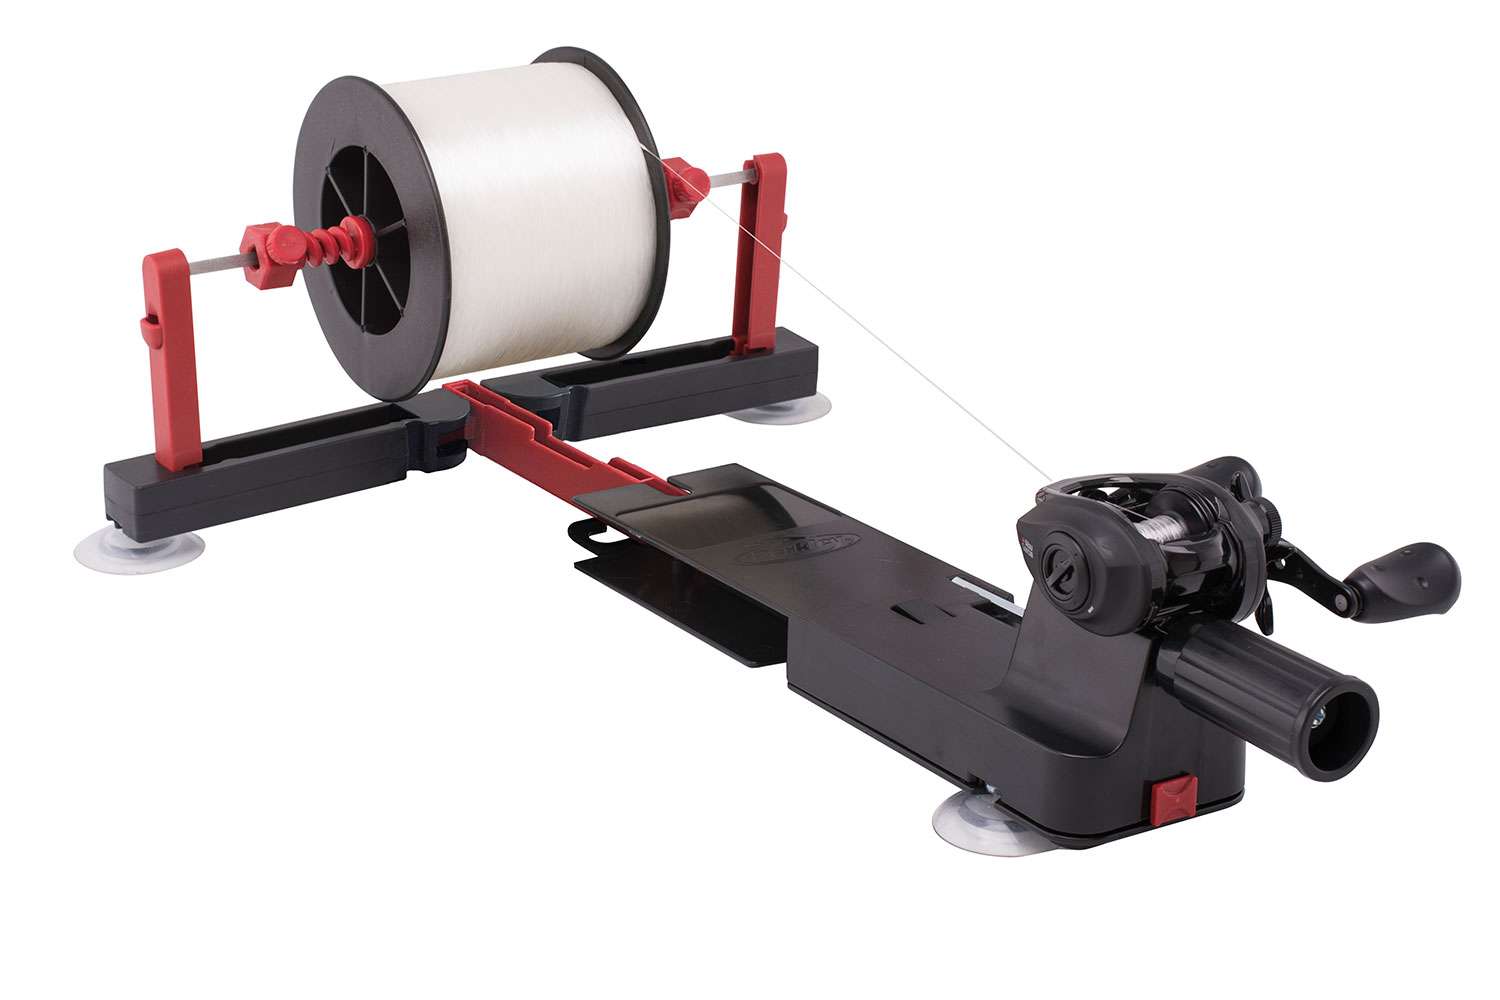 <p><b>Berkley Portable Line Spooling Station, $39.99</b></p> The new and improved Berkley Portable Line Spooling Station Max can be used on both casting and spinning reels and the included spinning spool attachment helps to eliminate line twist when spooling spinning reels. Fits up to most 3,000-yard spools. </br> <a href=